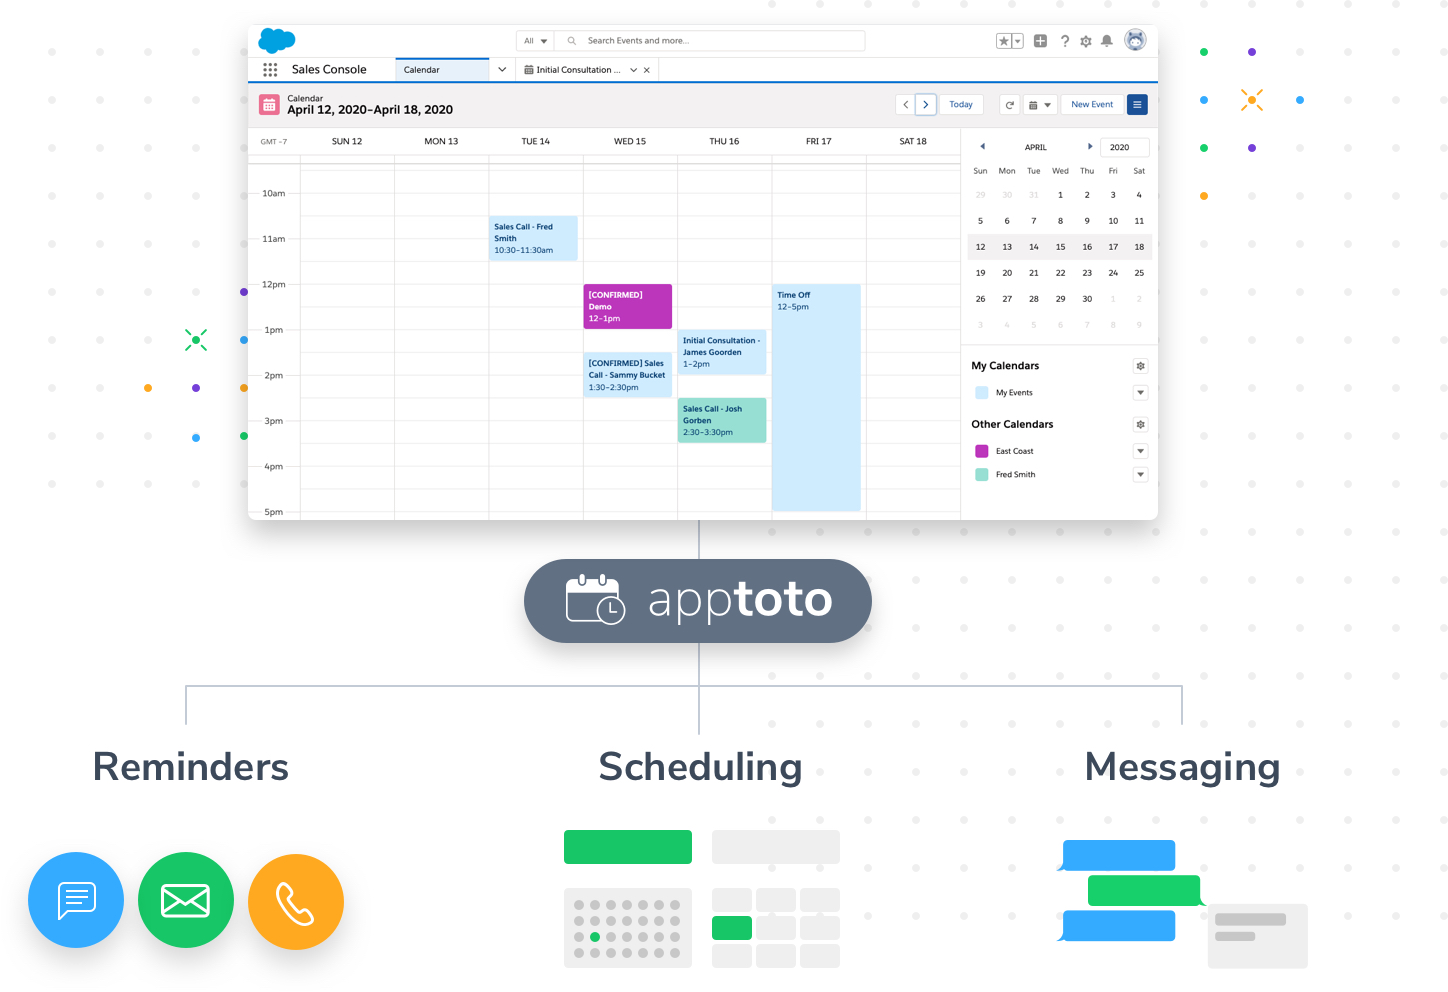 Salesforce Calendar connected to Apptoto with appointment reminders, online scheduling, and two-way messaging products